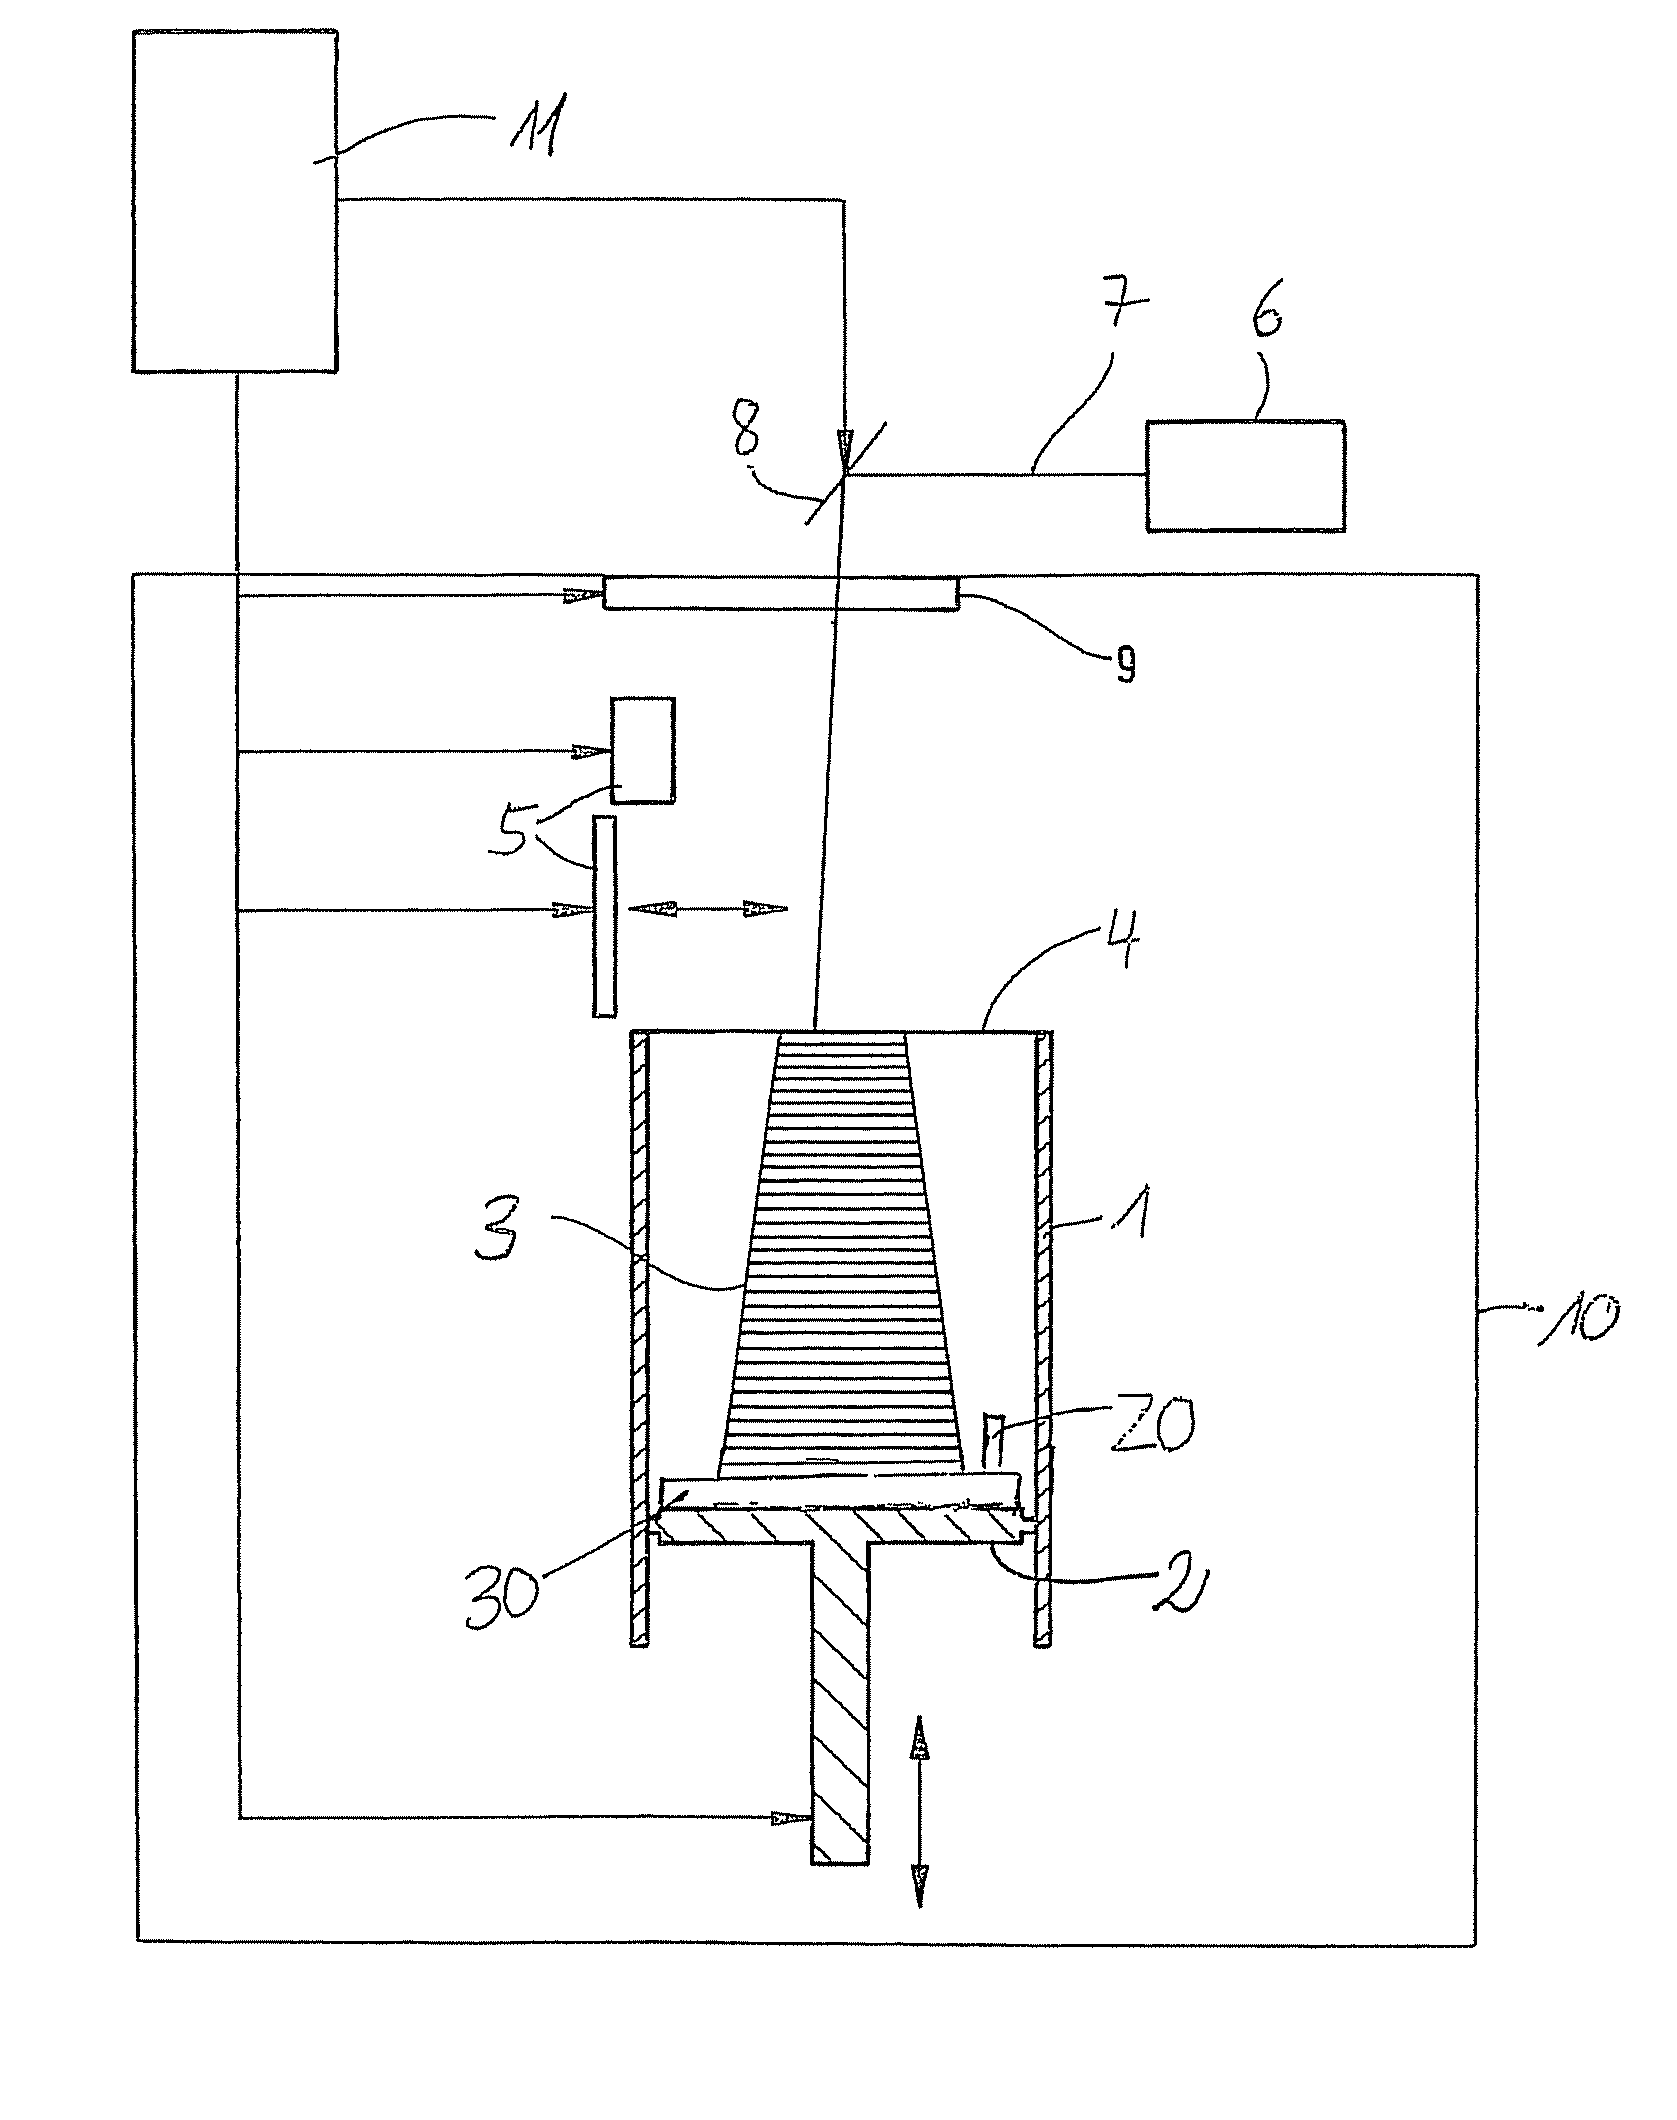 Method for manufacturing a three-dimensional object